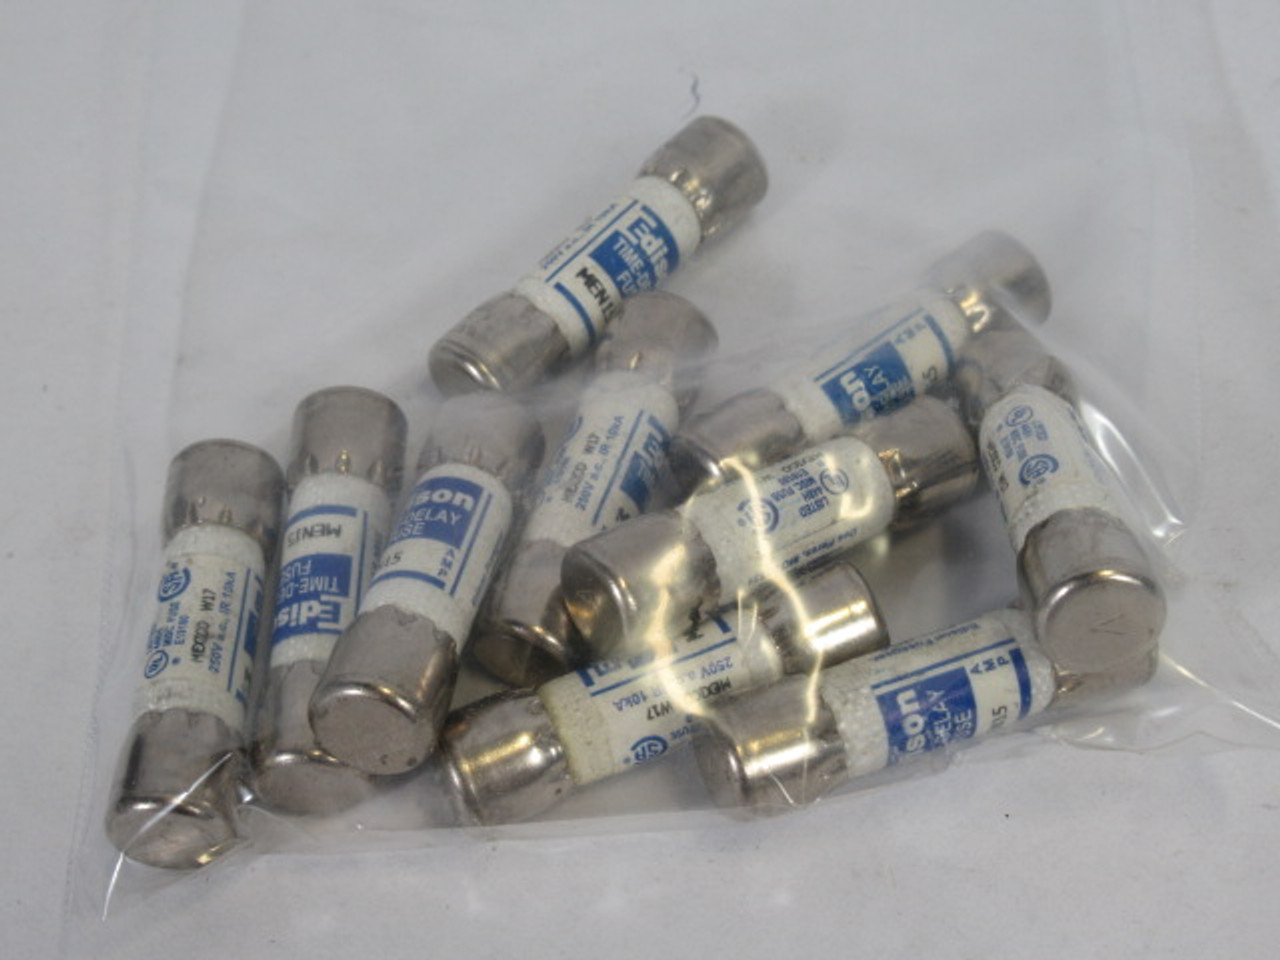 Edison MEN15 Time Delay Fuse 15A 250V Lot of 10 USED